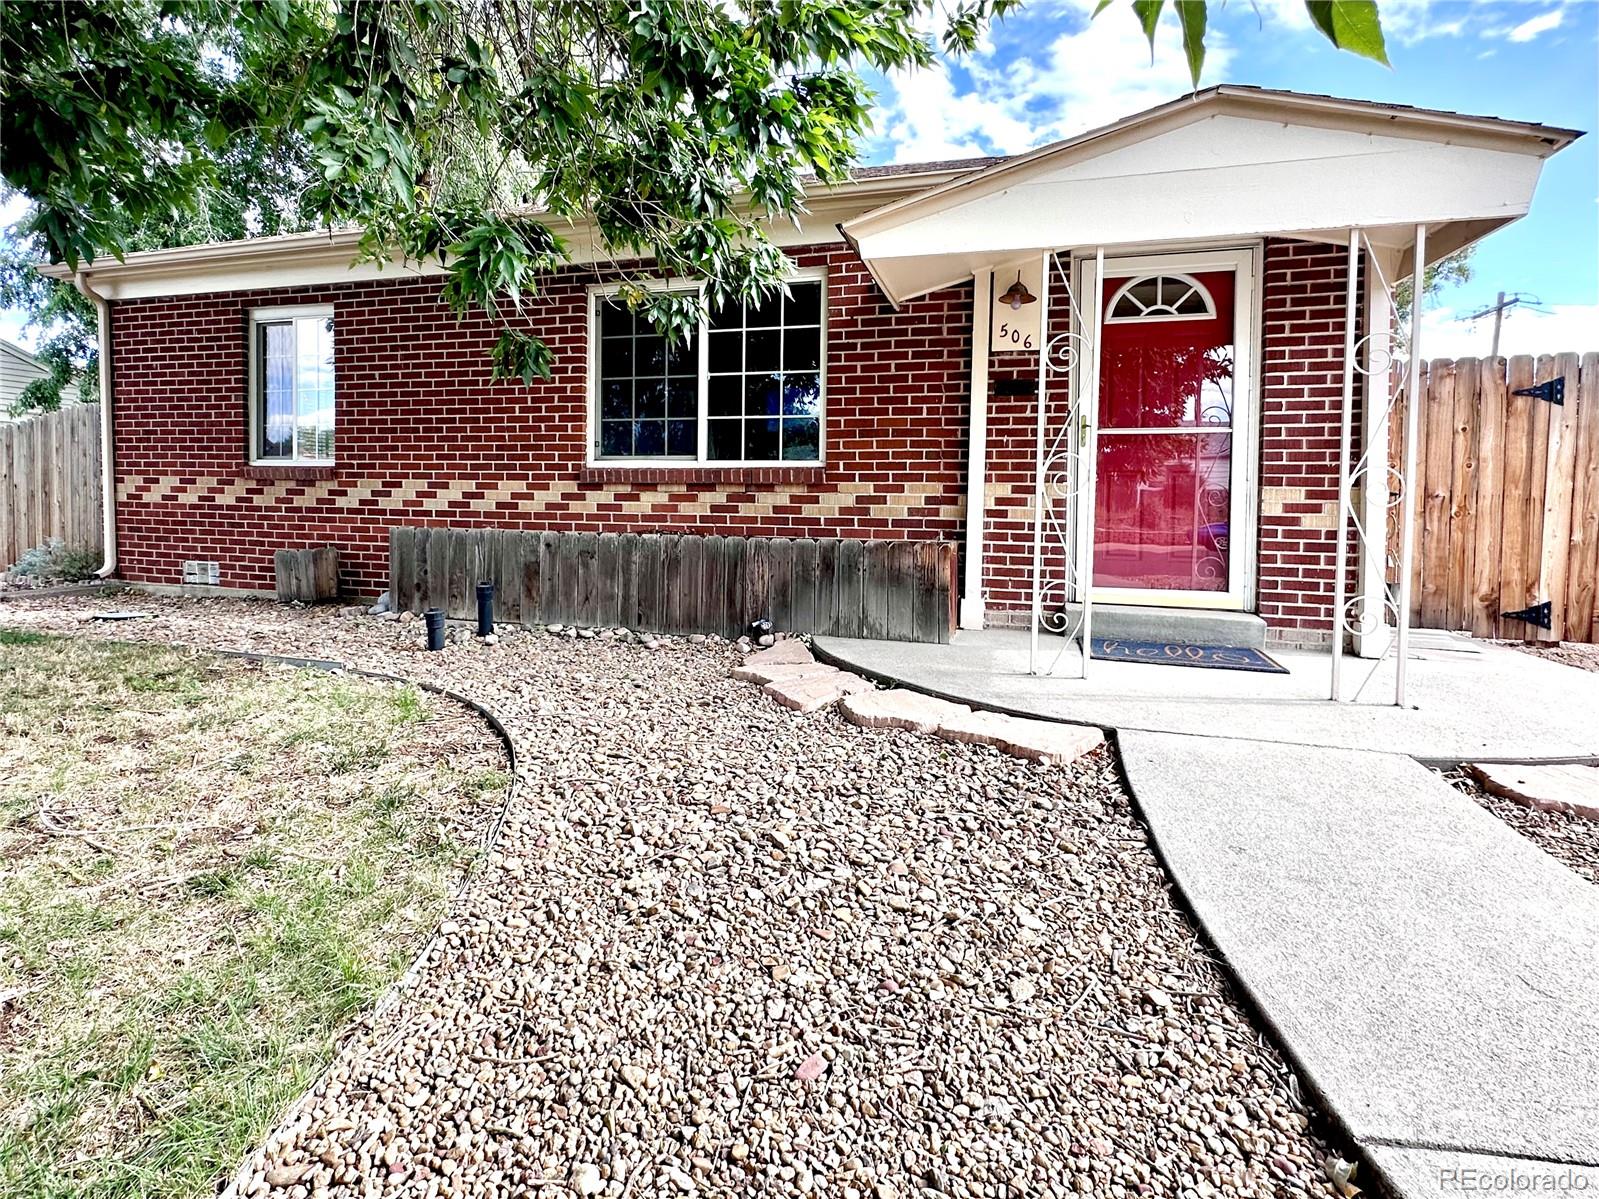 506 s quieto way, Denver sold home. Closed on 2023-12-29 for $405,000.